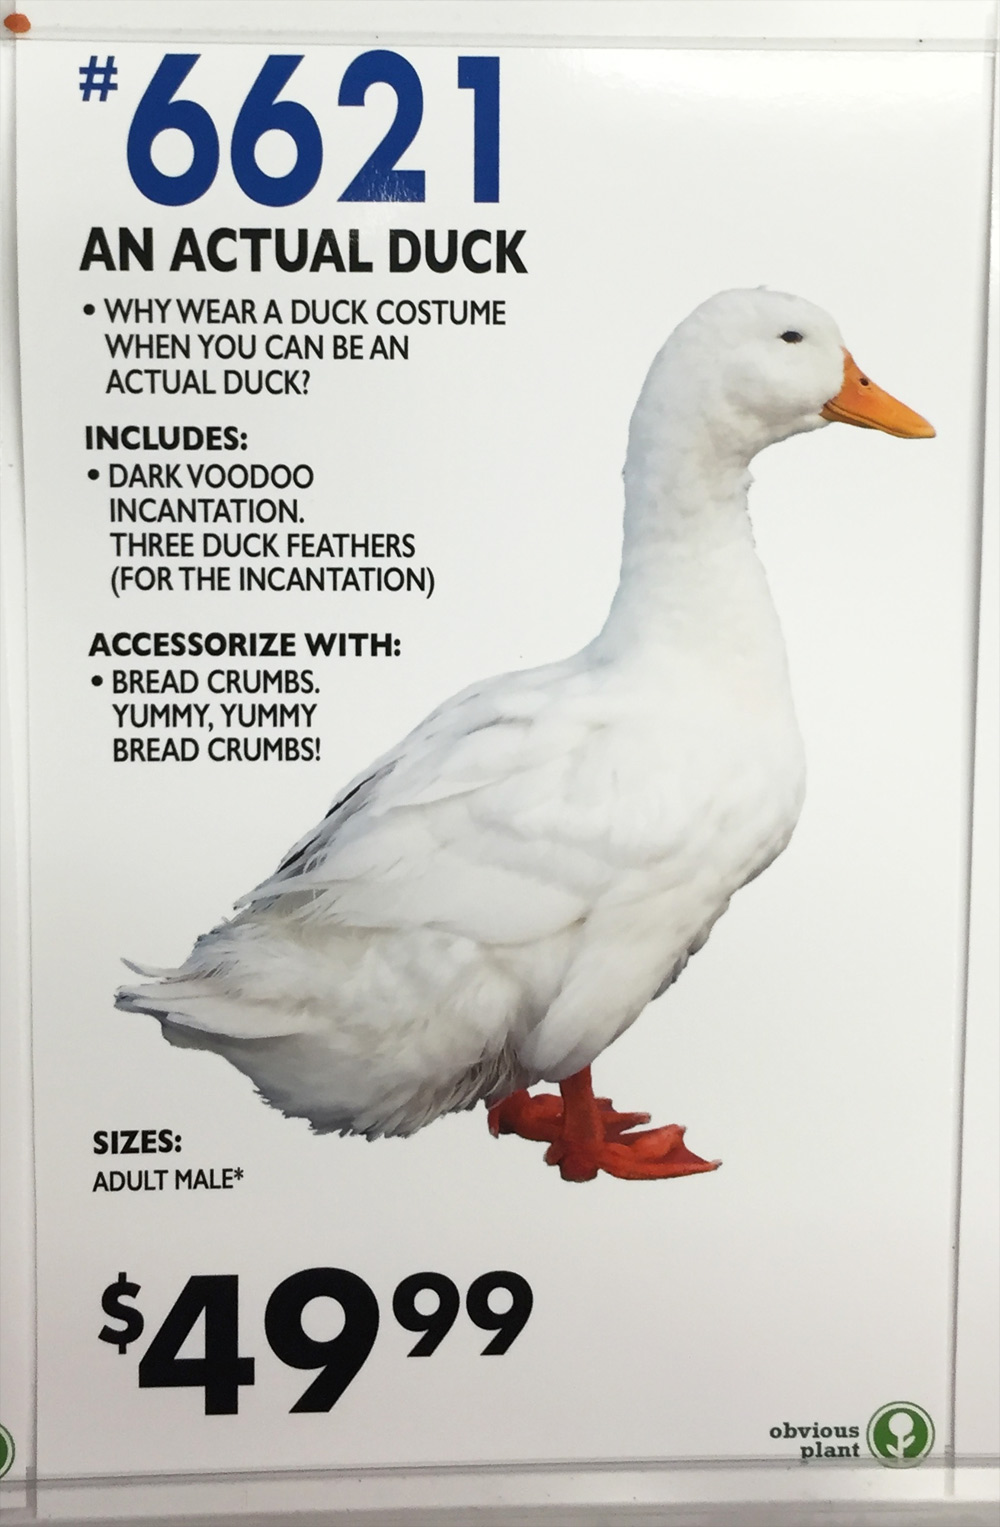 fake halloween costumes - An Actual Duck Why Wear A Duck Costume When You Can Be An Actual Duck? Includes Dark Voodoo Incantation. Three Duck Feathers For The Incantation Accessorize With Bread Crumbs. Yummy, Yummy Bread Crumbs! Sizes Adult Male obvious p